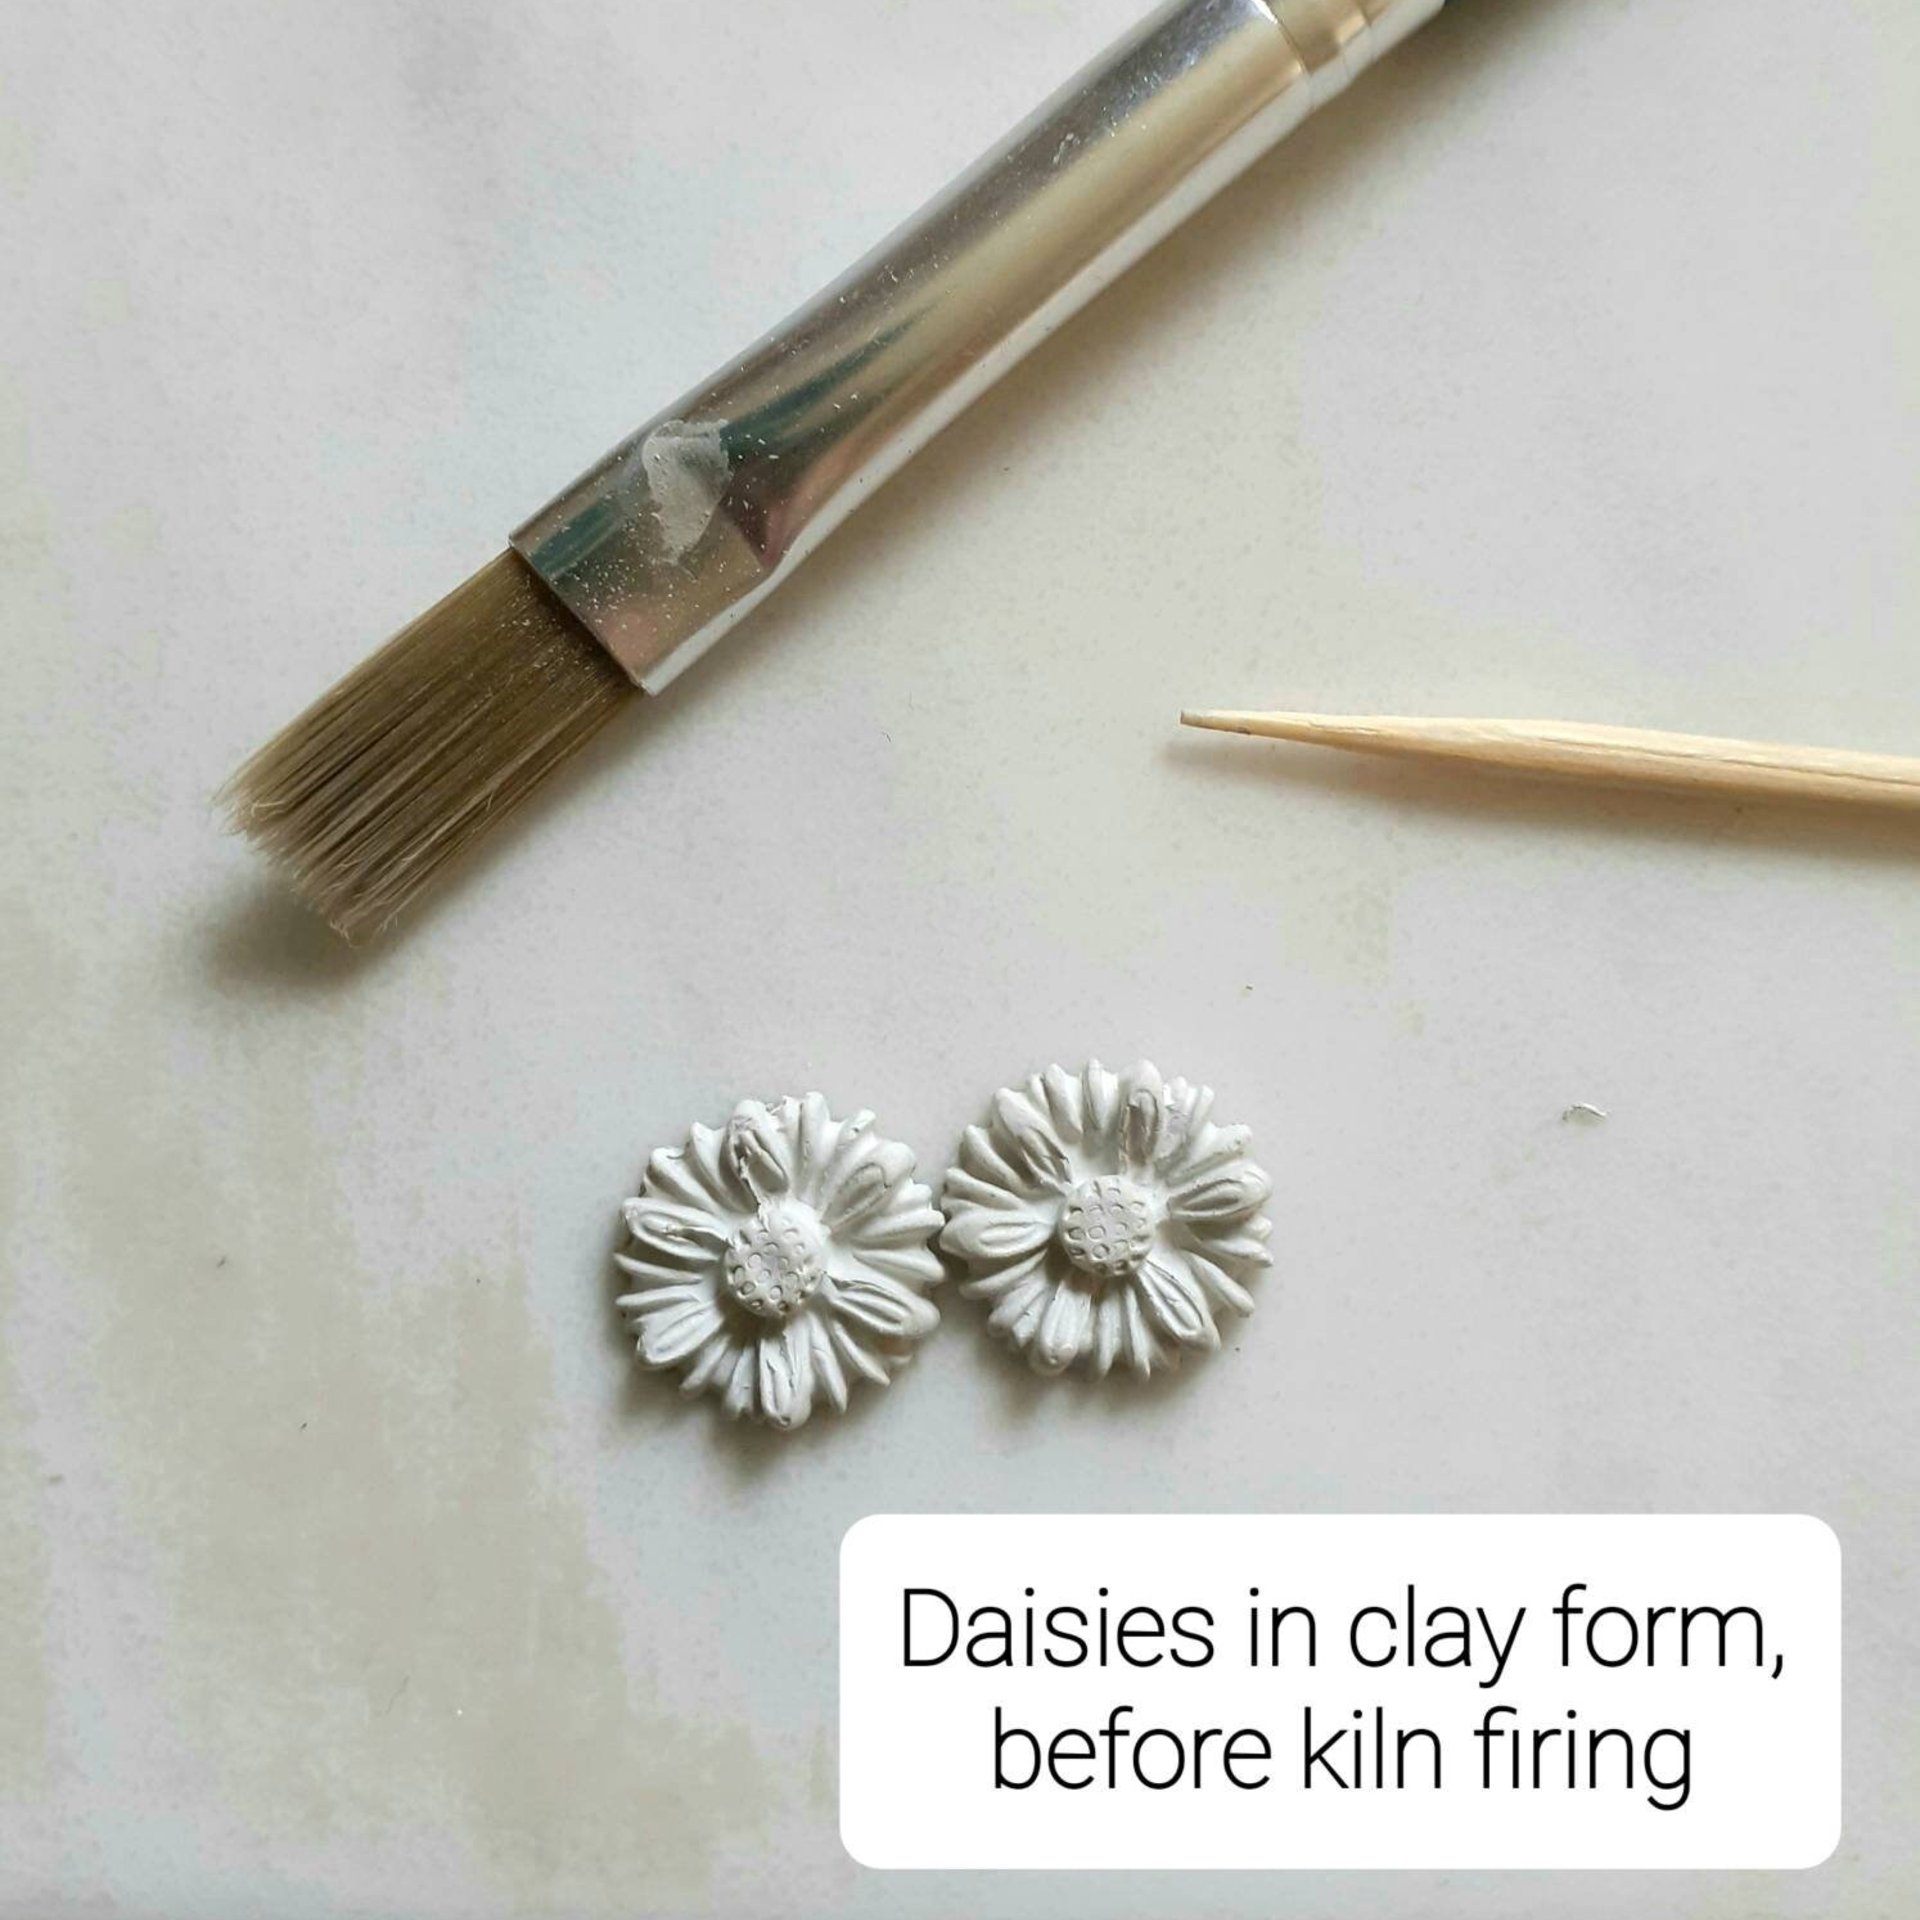 Precious metal clay daisies in the greenware stage, prior to firing to create pure silver ~ The Tiny Tree Frog Jewellery